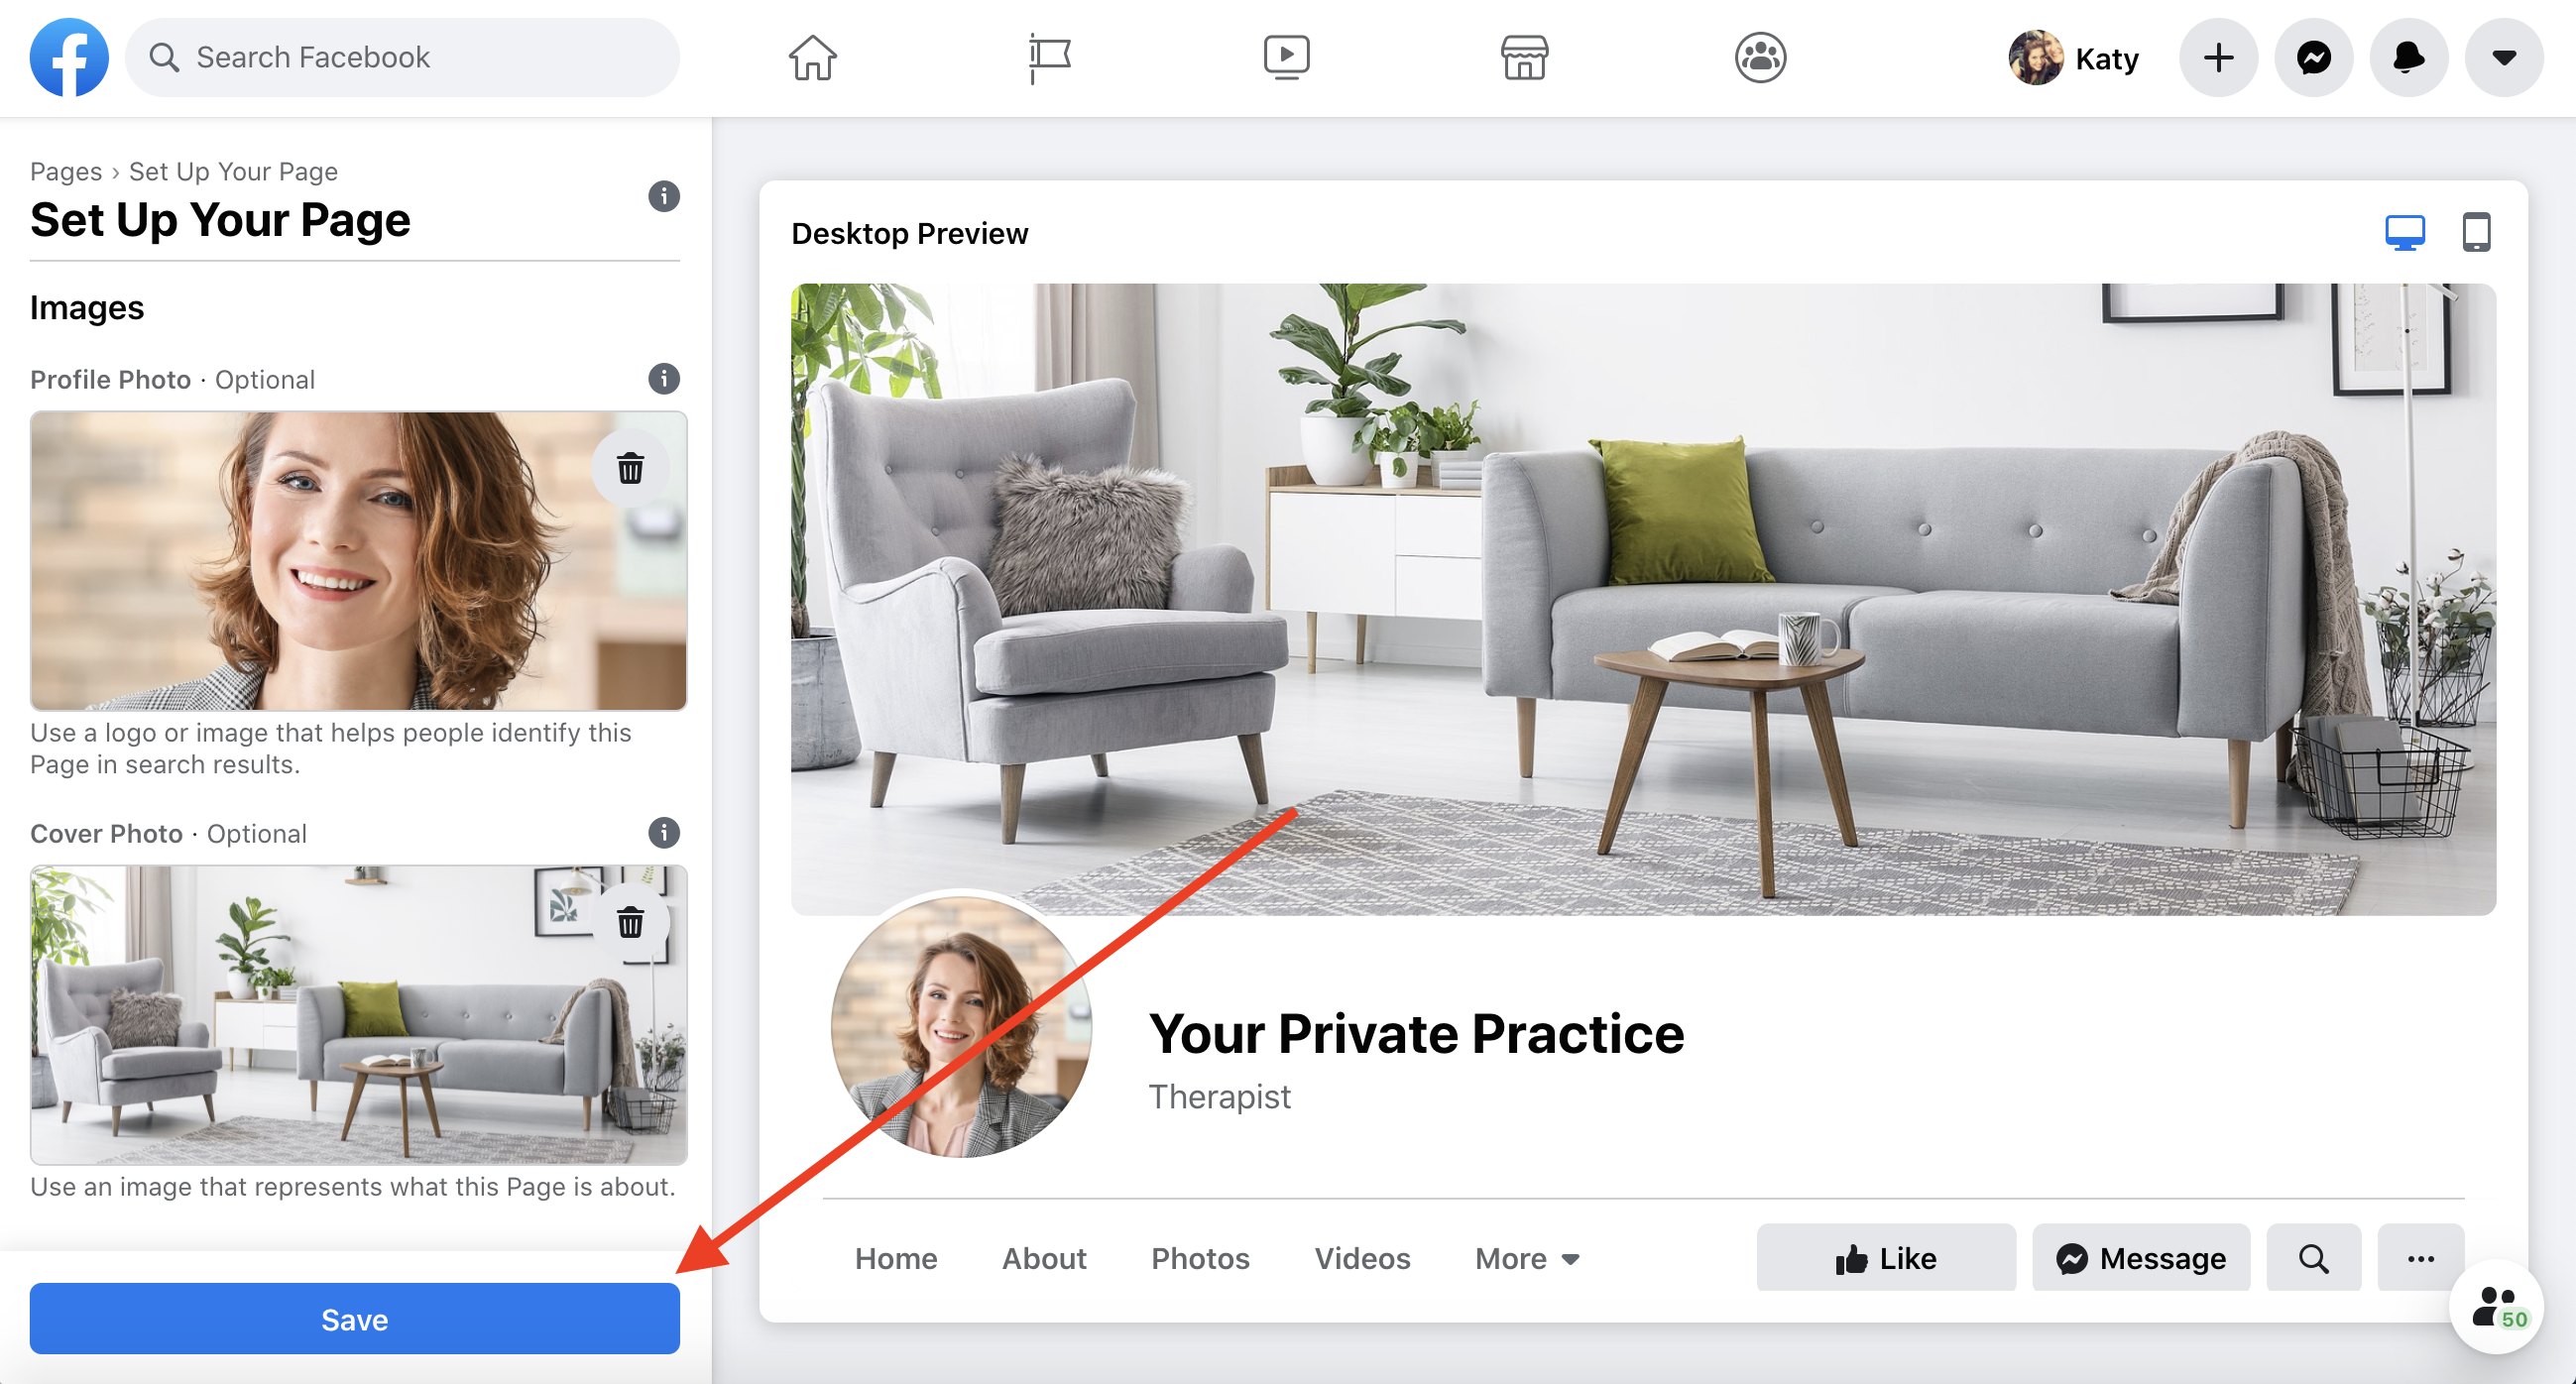 Save images button | The Therapist’s Guide to Creating an Awesome Facebook Business Page in 2020 | Brighter Vision Web Solutions | Marketing Blog for Therapists